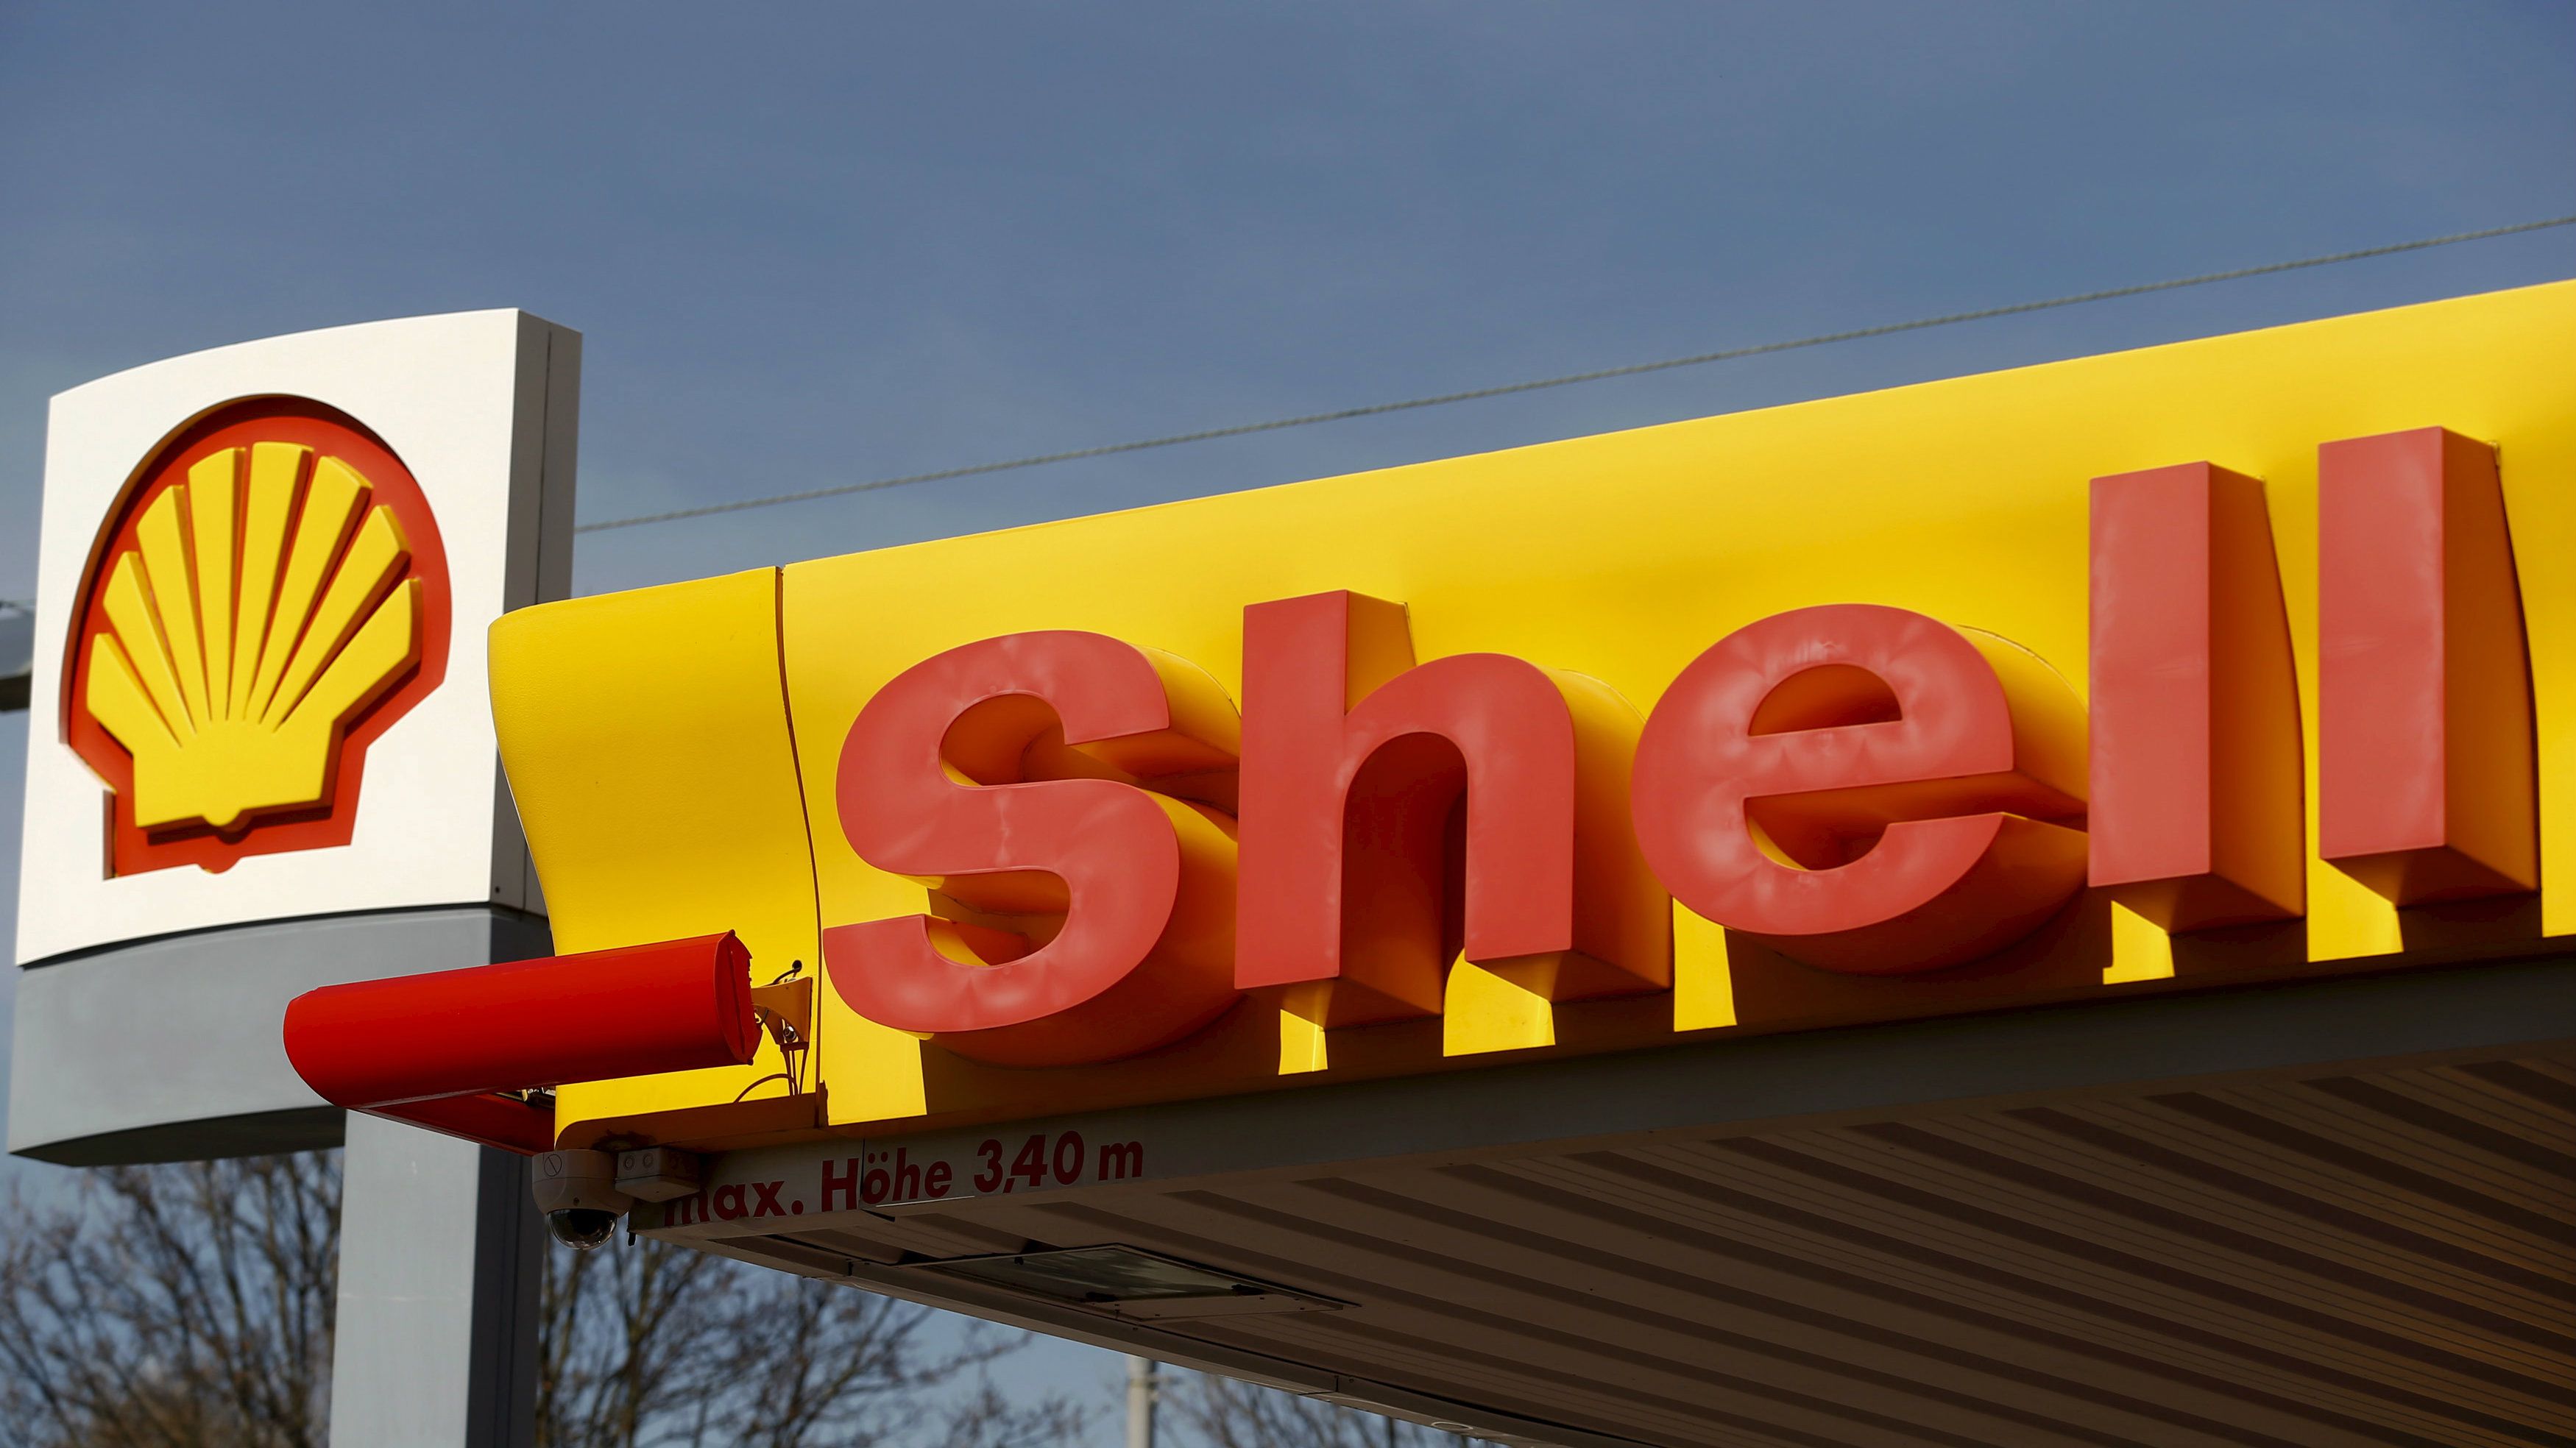 Oil giant, Royal Dutch Shell Plc says it is seeking to develop Nigeria’s domestic energy market around natural gas